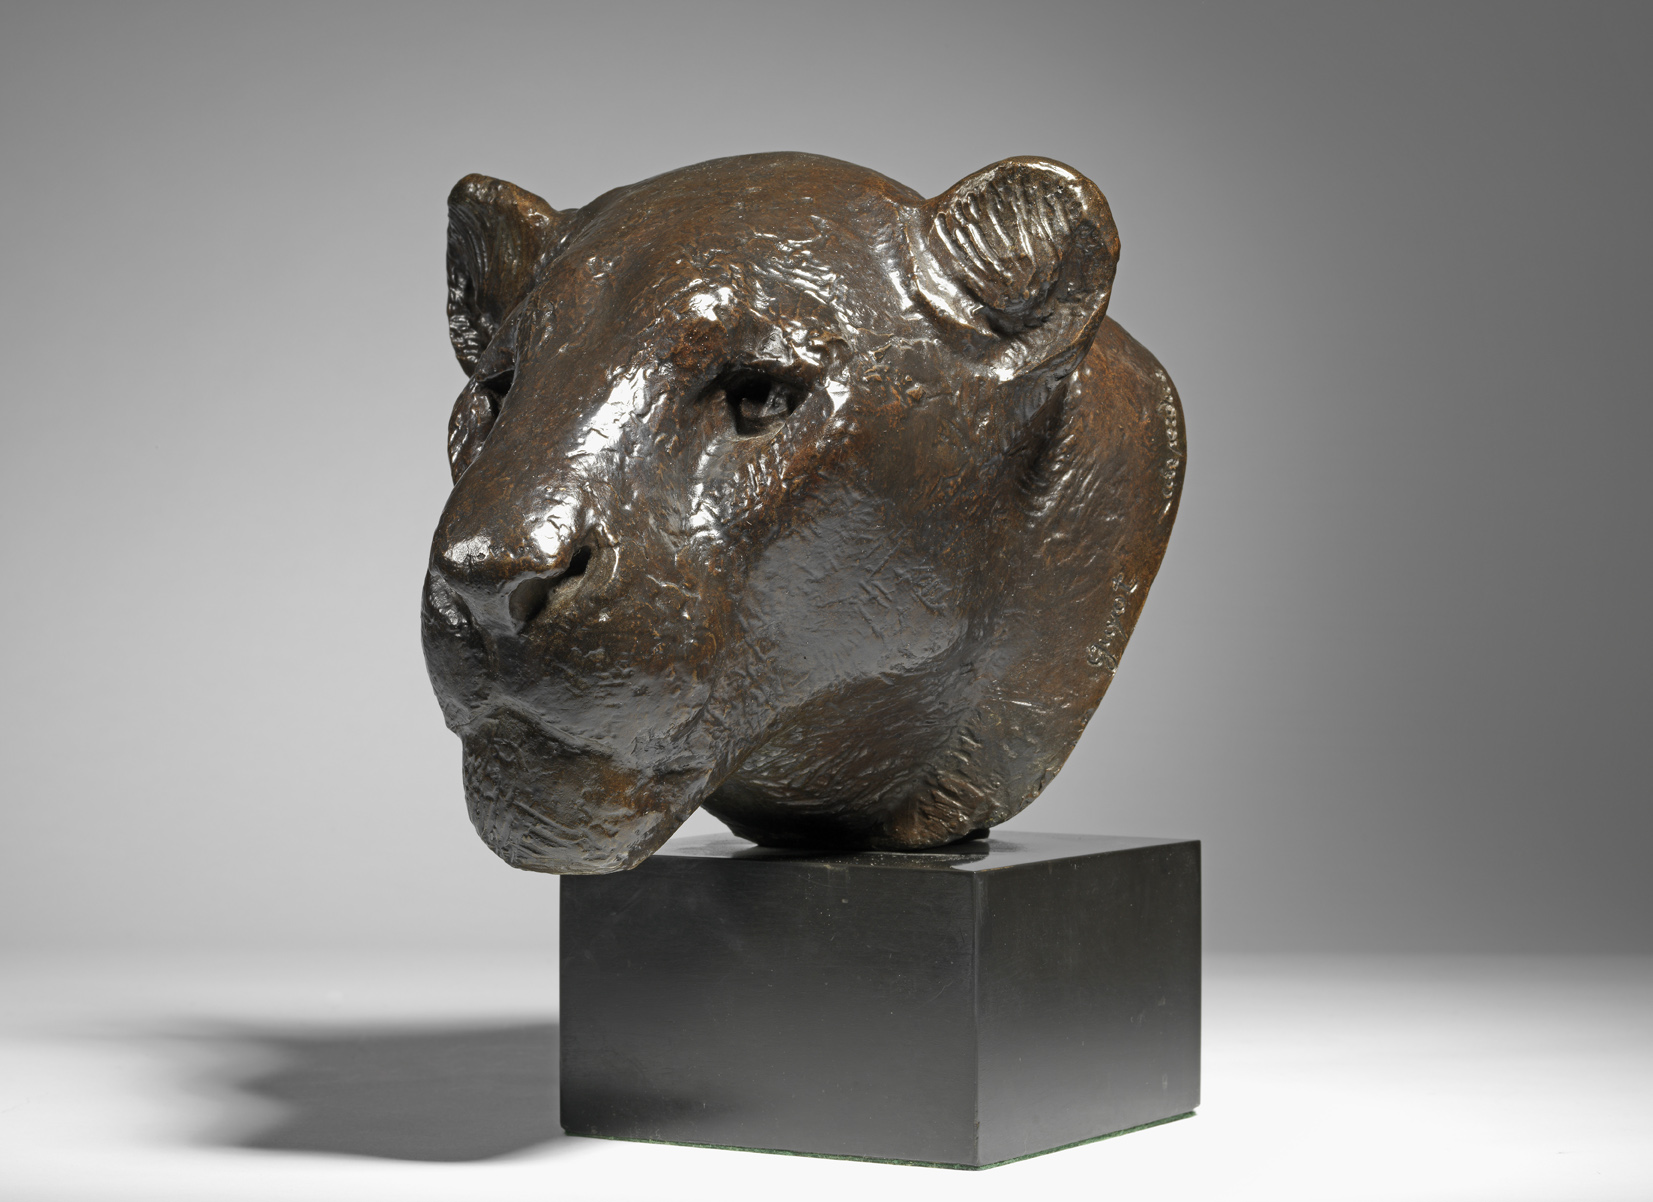 Bust of a Panther, c. 1920